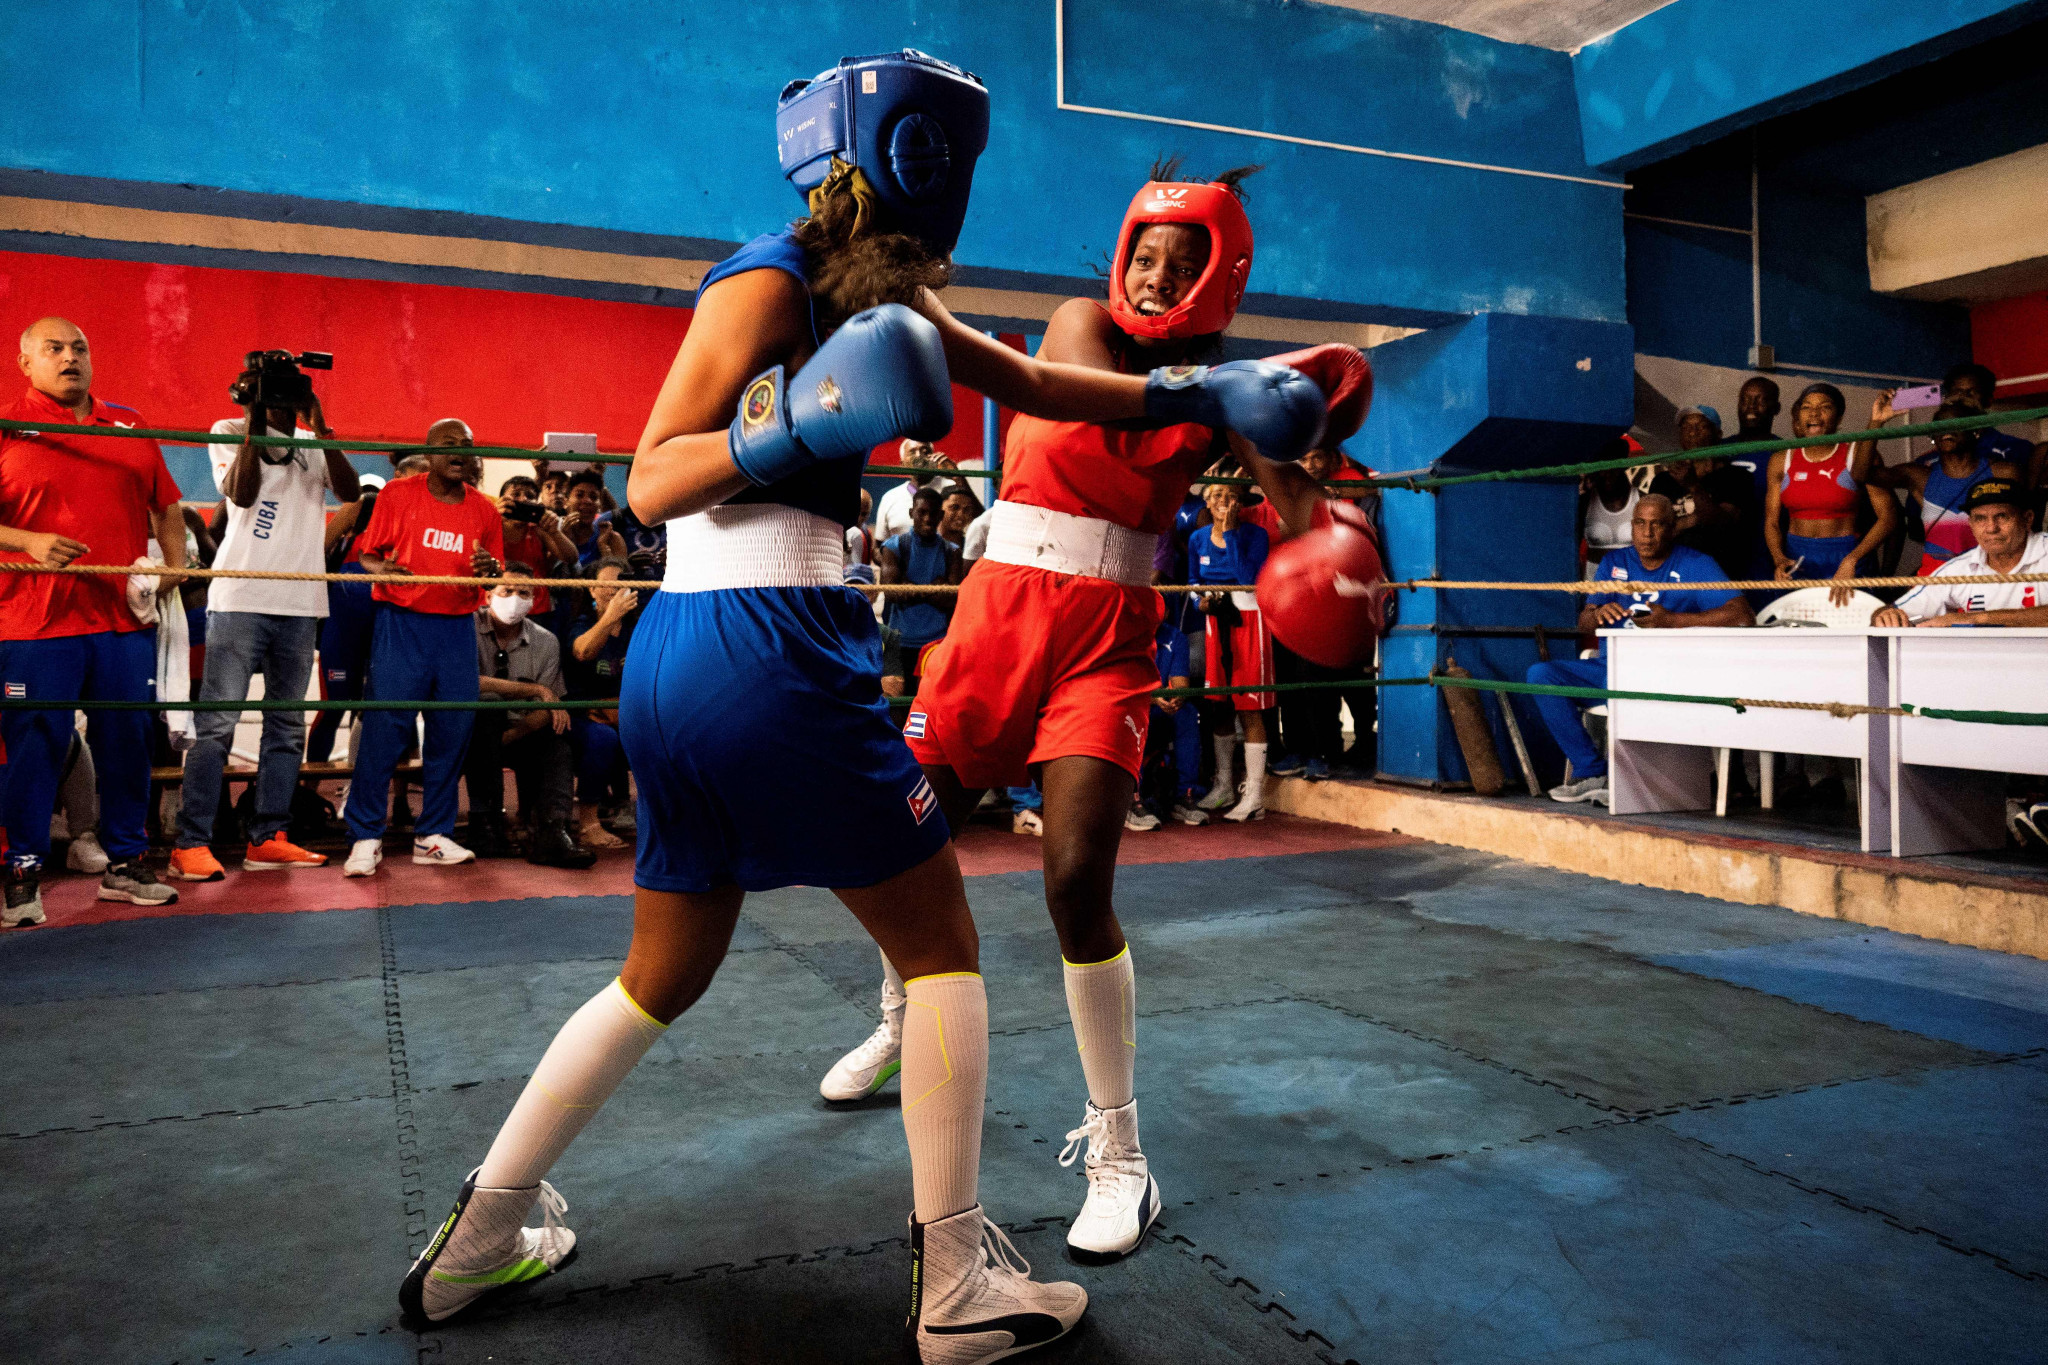 Cuba lifted a ban on women's boxing last month and plans are now underway to develop the sport in the country ©Getty Images